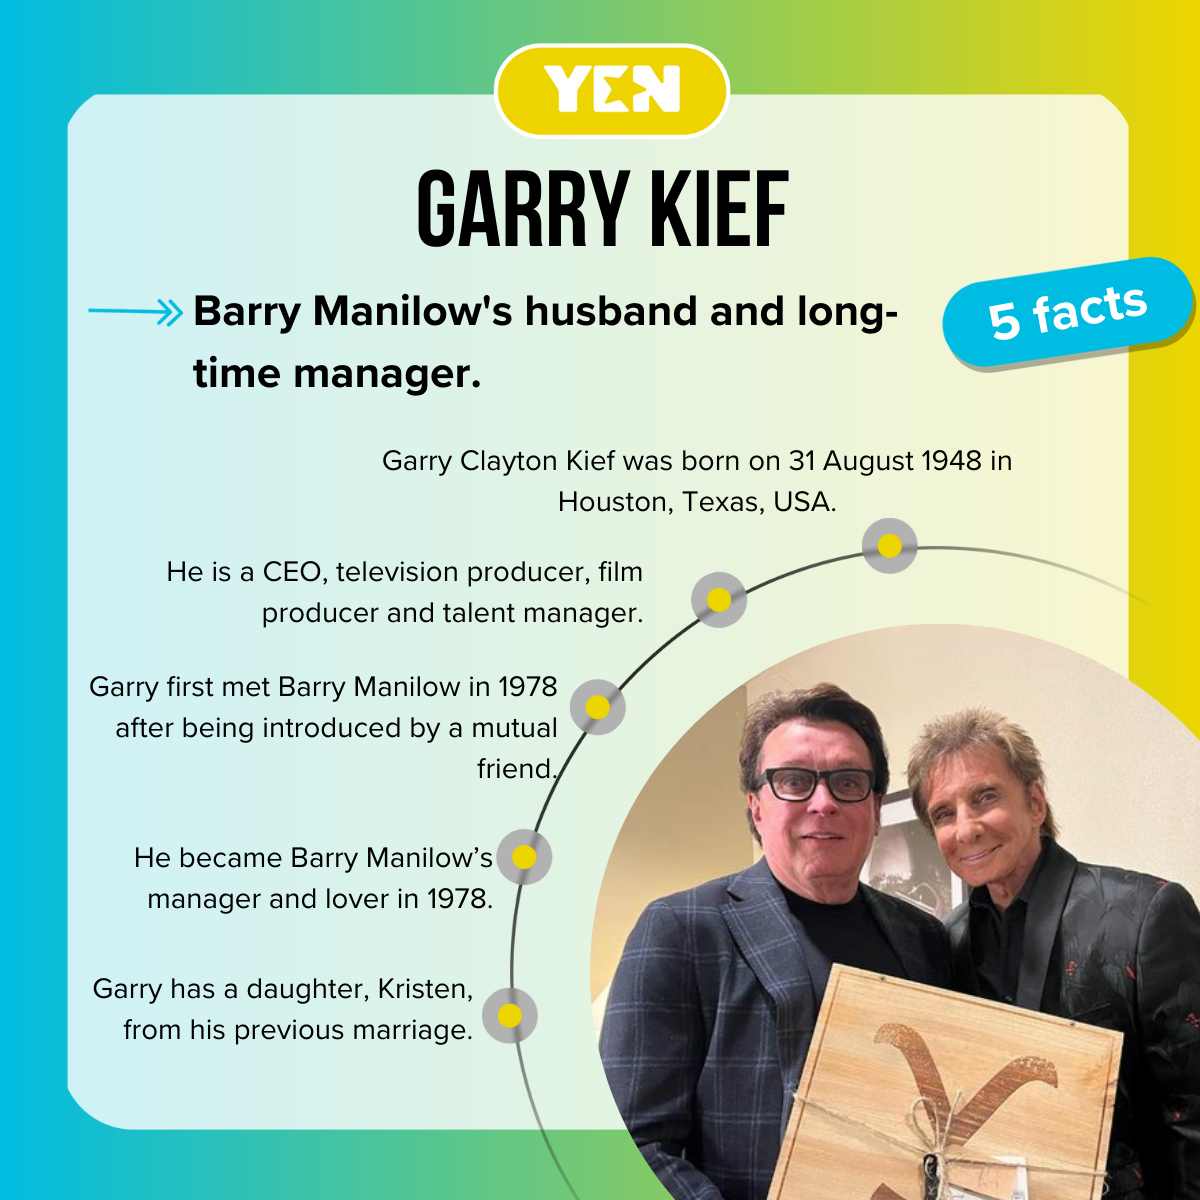 Facts about Gary Kief